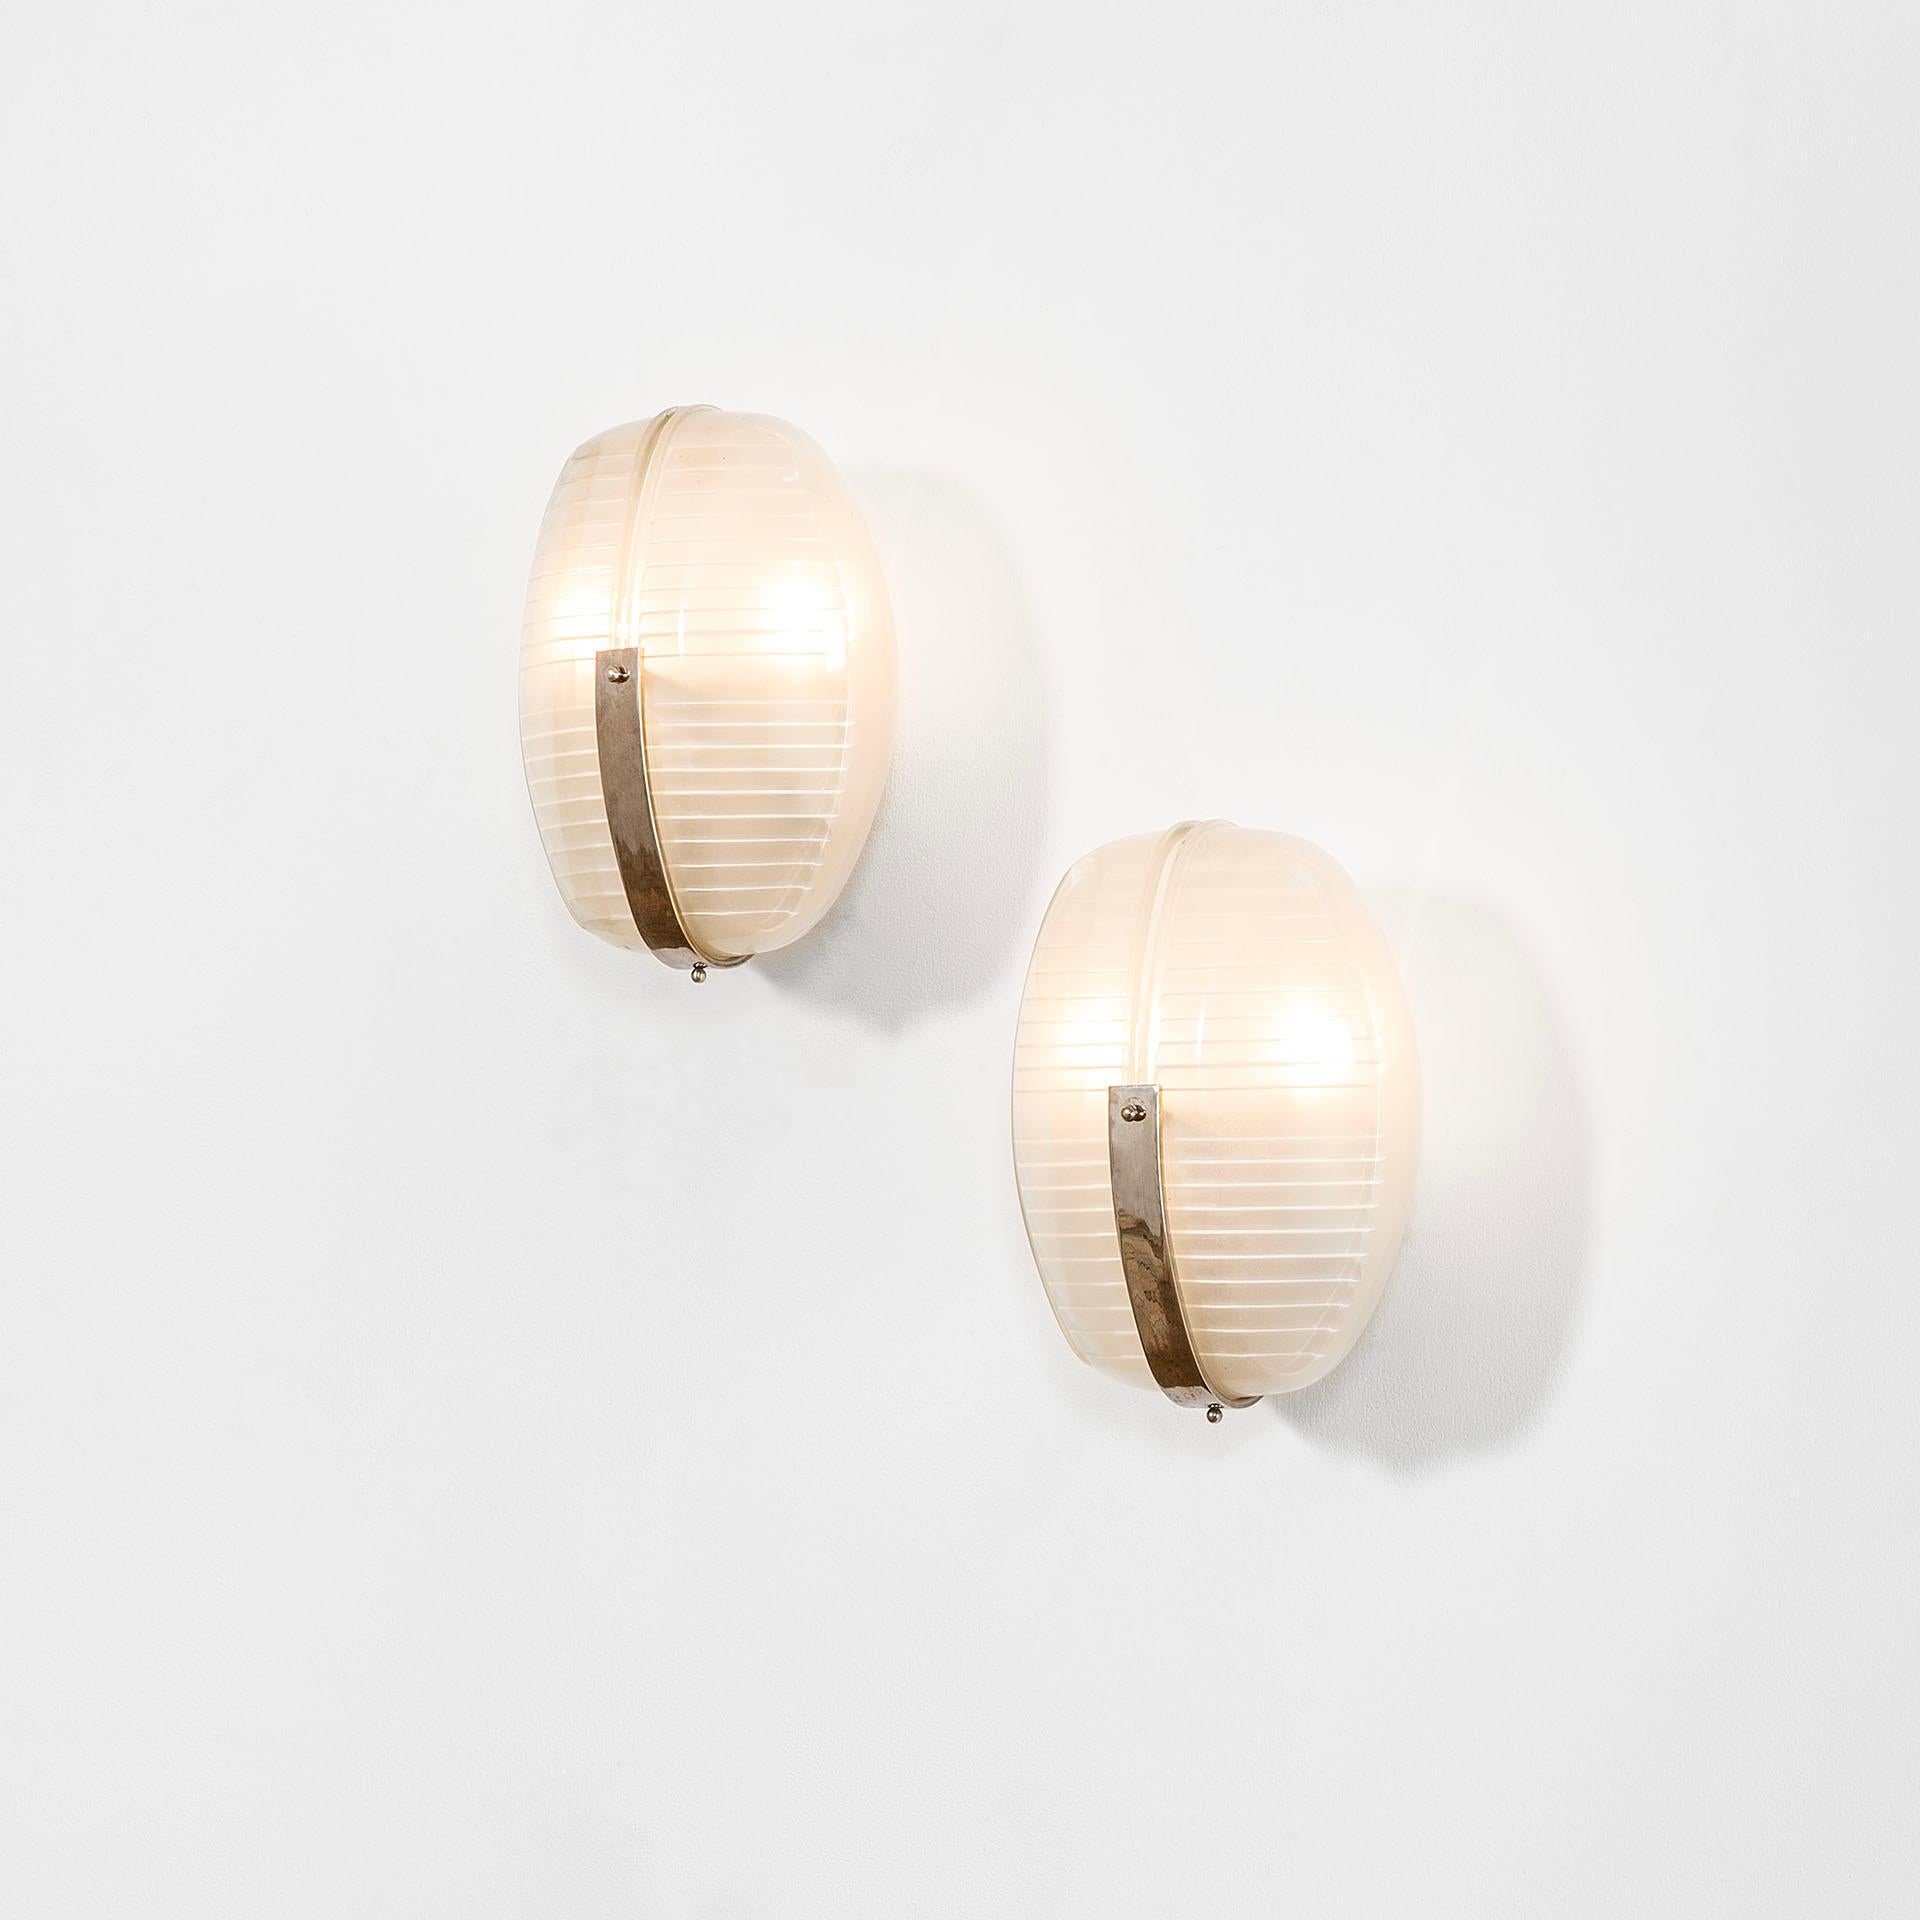 Vico Magistretti was among the first external collaborators of the young company Artemide, founded in 1959 originally for the production of lamps only, to which furniture was later added. Since 1961, Magistretti has been proposing lamps, still